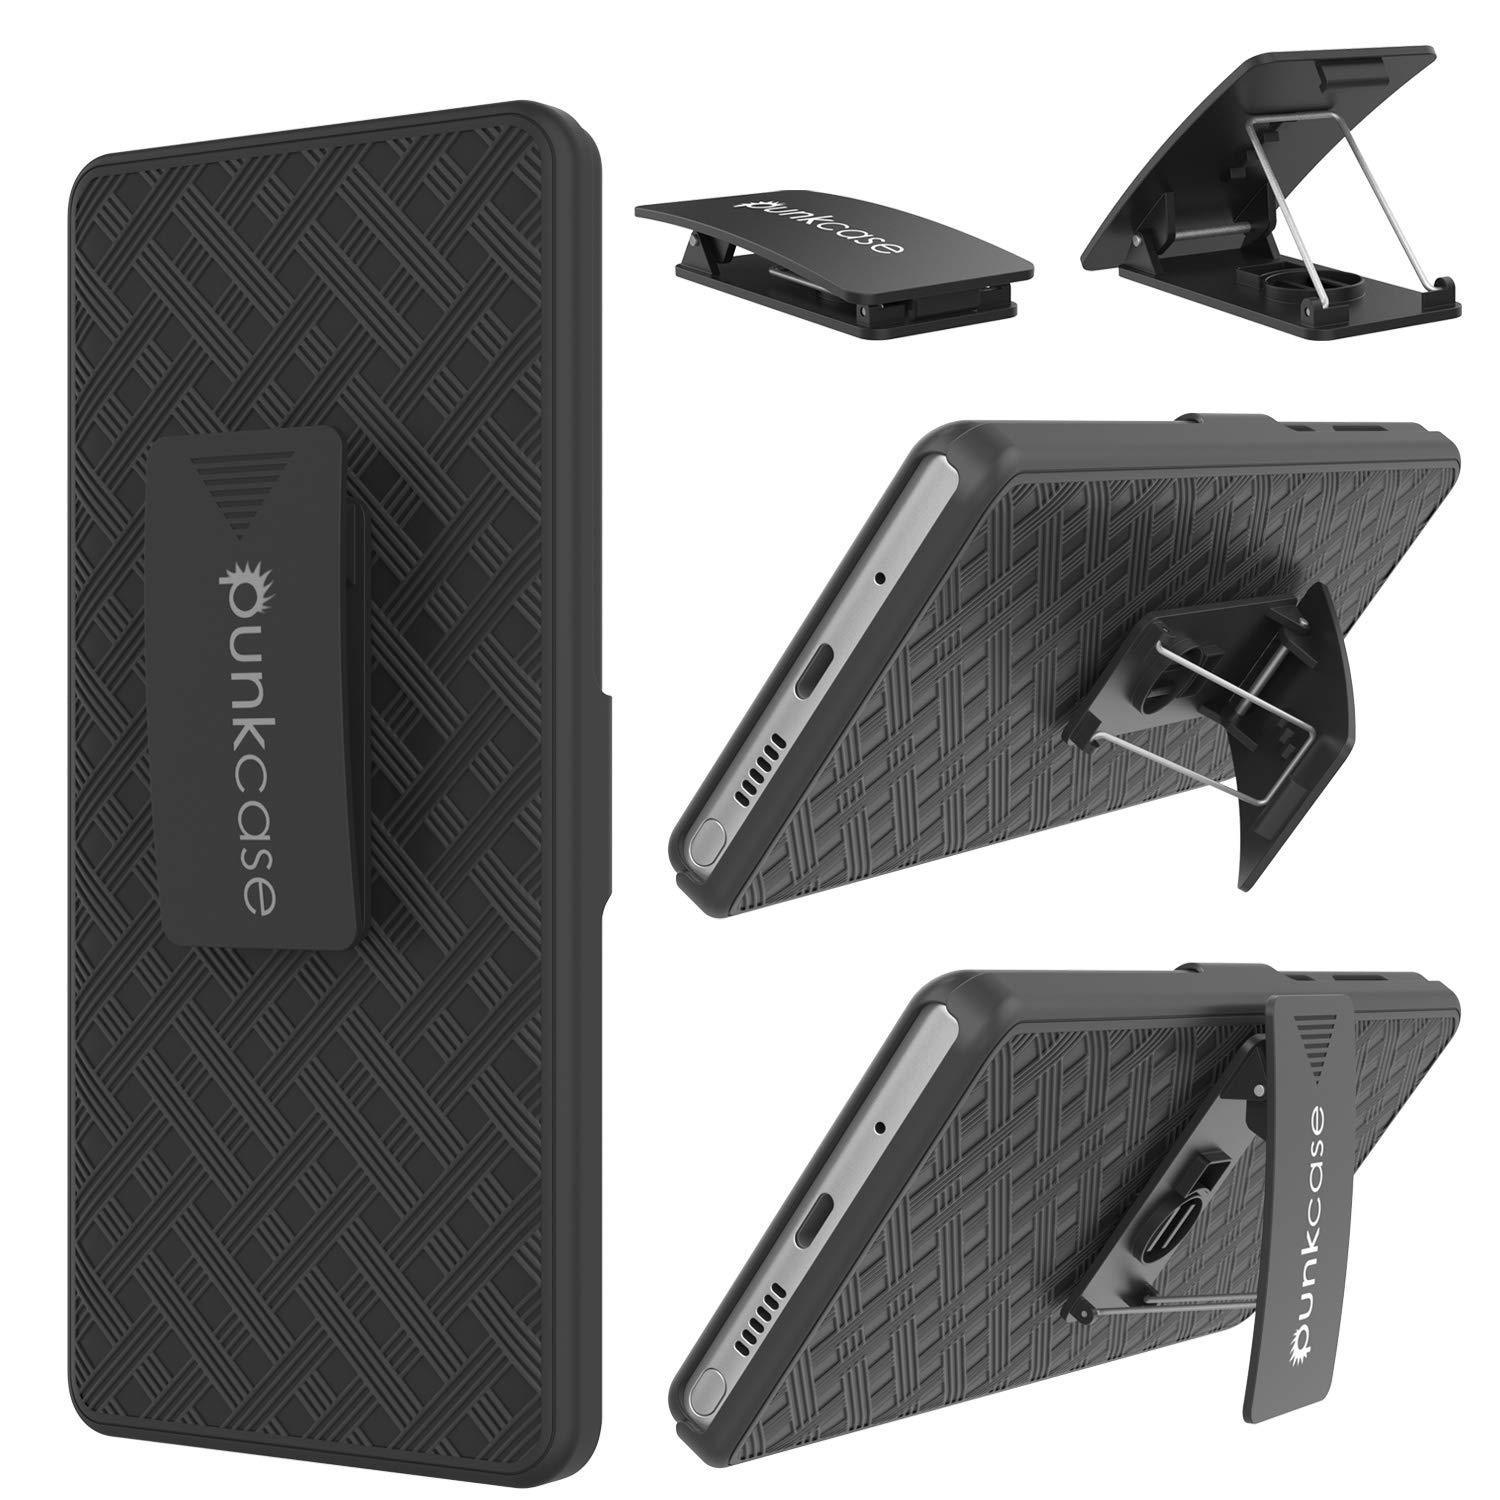 PunkCase Galaxy Note 20 Case with Screen Protector, Holster Belt Clip & Built-in Kickstand [Black]